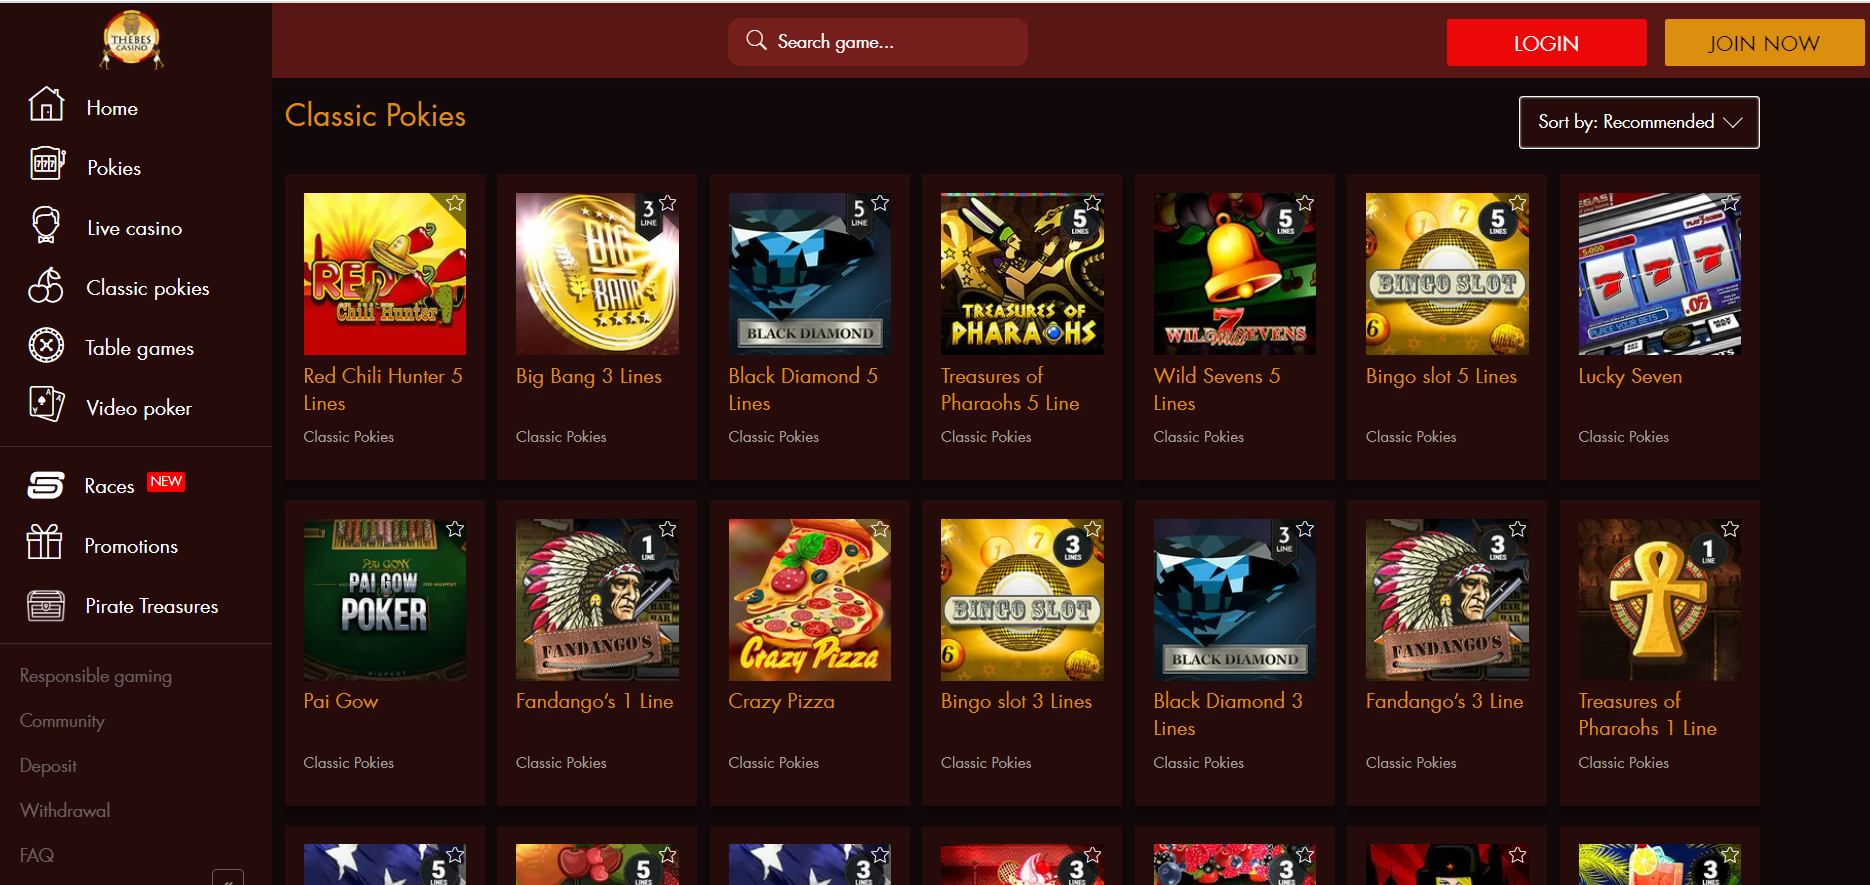 Thebes casino sign up account